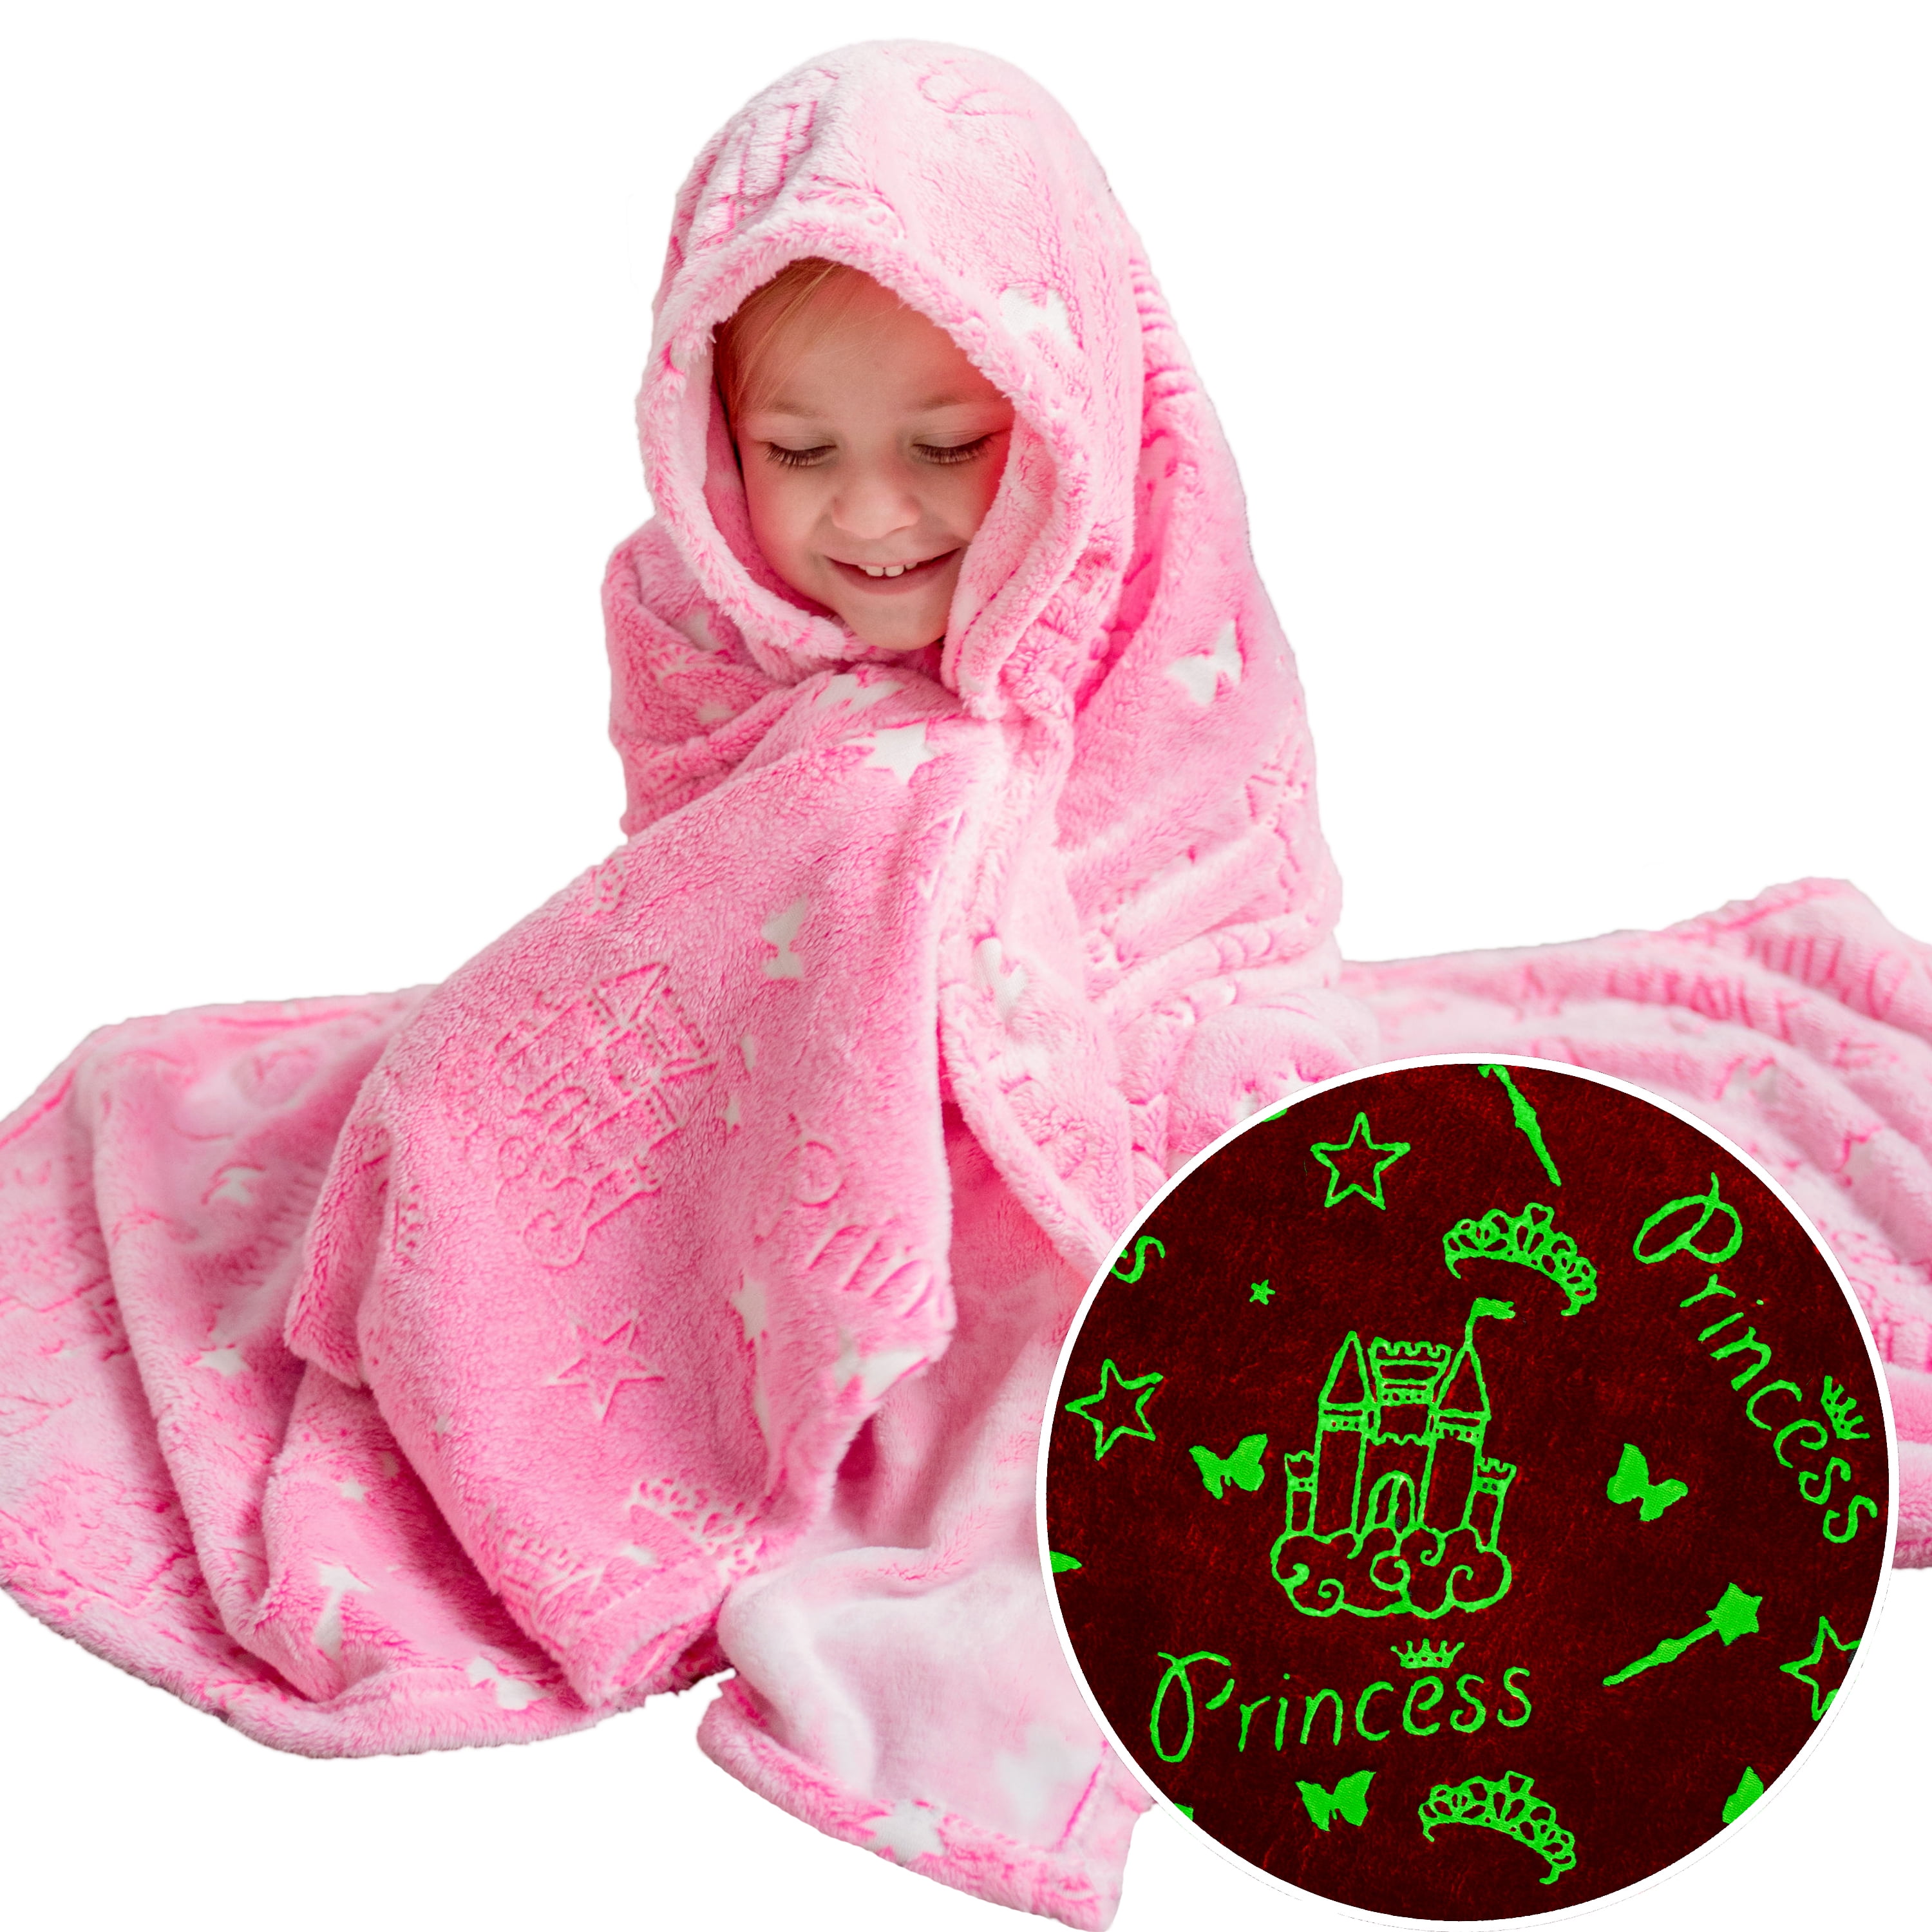 Large 60in x 50in Glowing Magical Blankets Gift for Girls Unicorn Blanket Glow in the Dark Luminous Fairy Blanket for Kids Pink Unicorn and Fairy Soft Plush Pink Fantasy Star Blanket Throw 